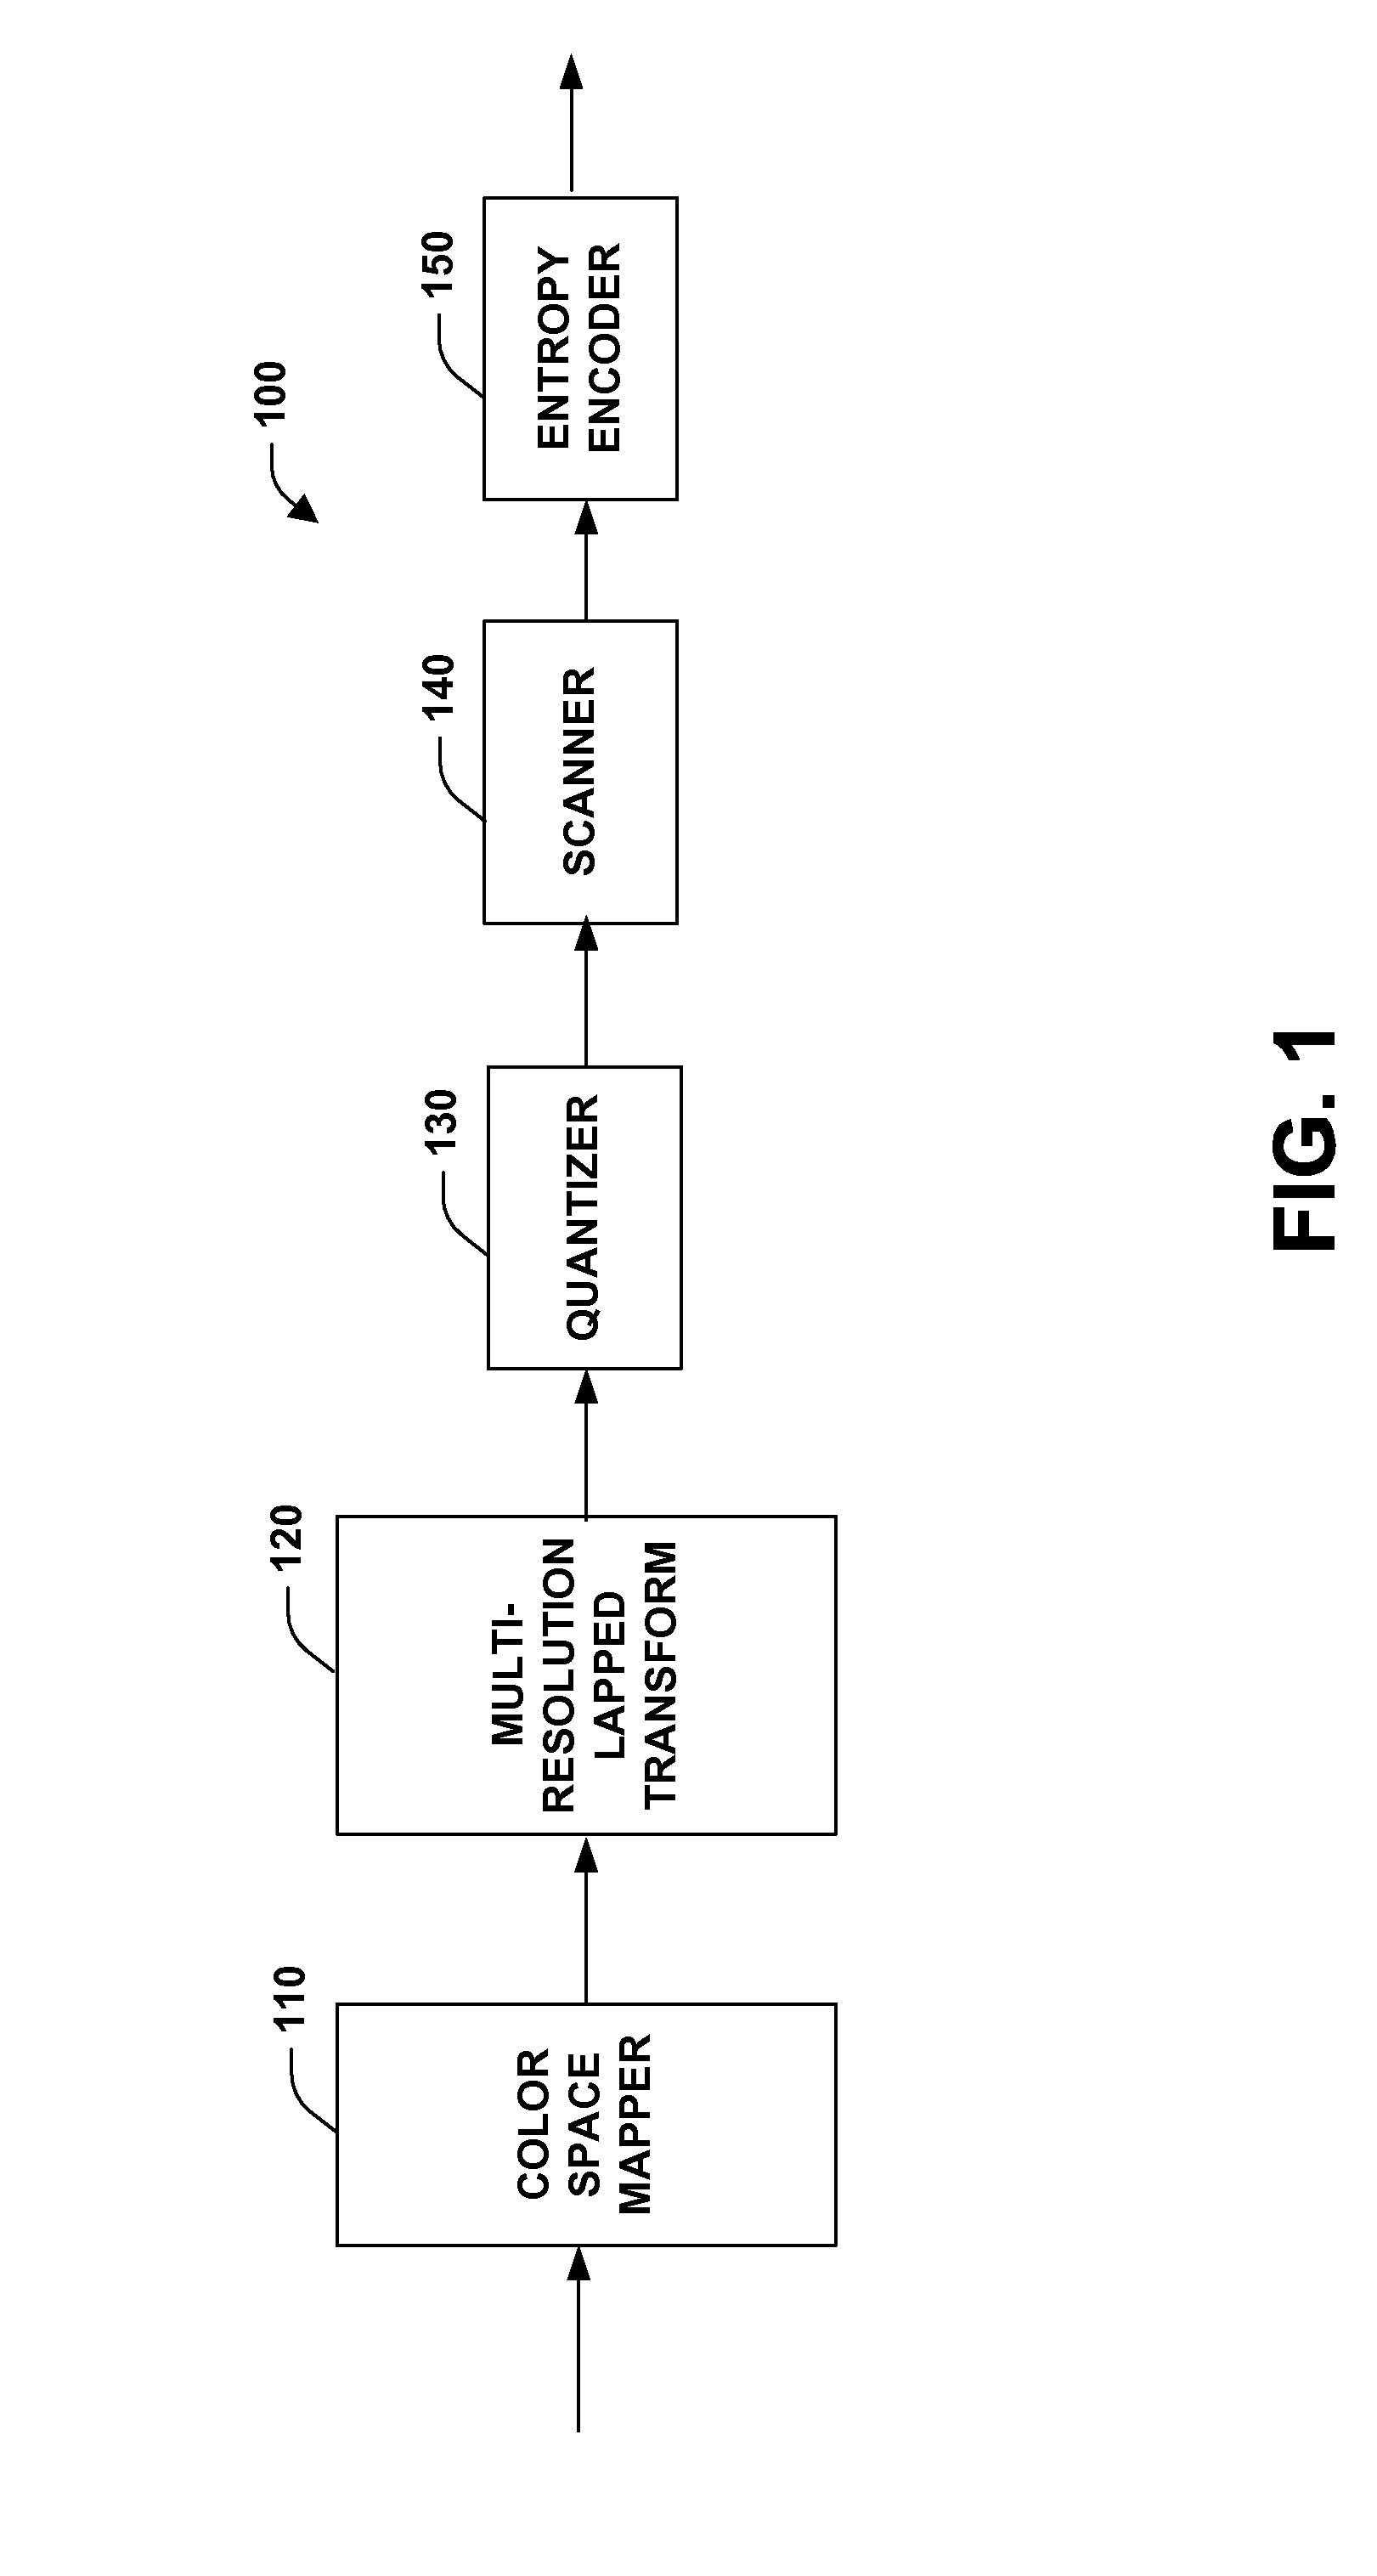 System and method for progressively transforming and coding digital data